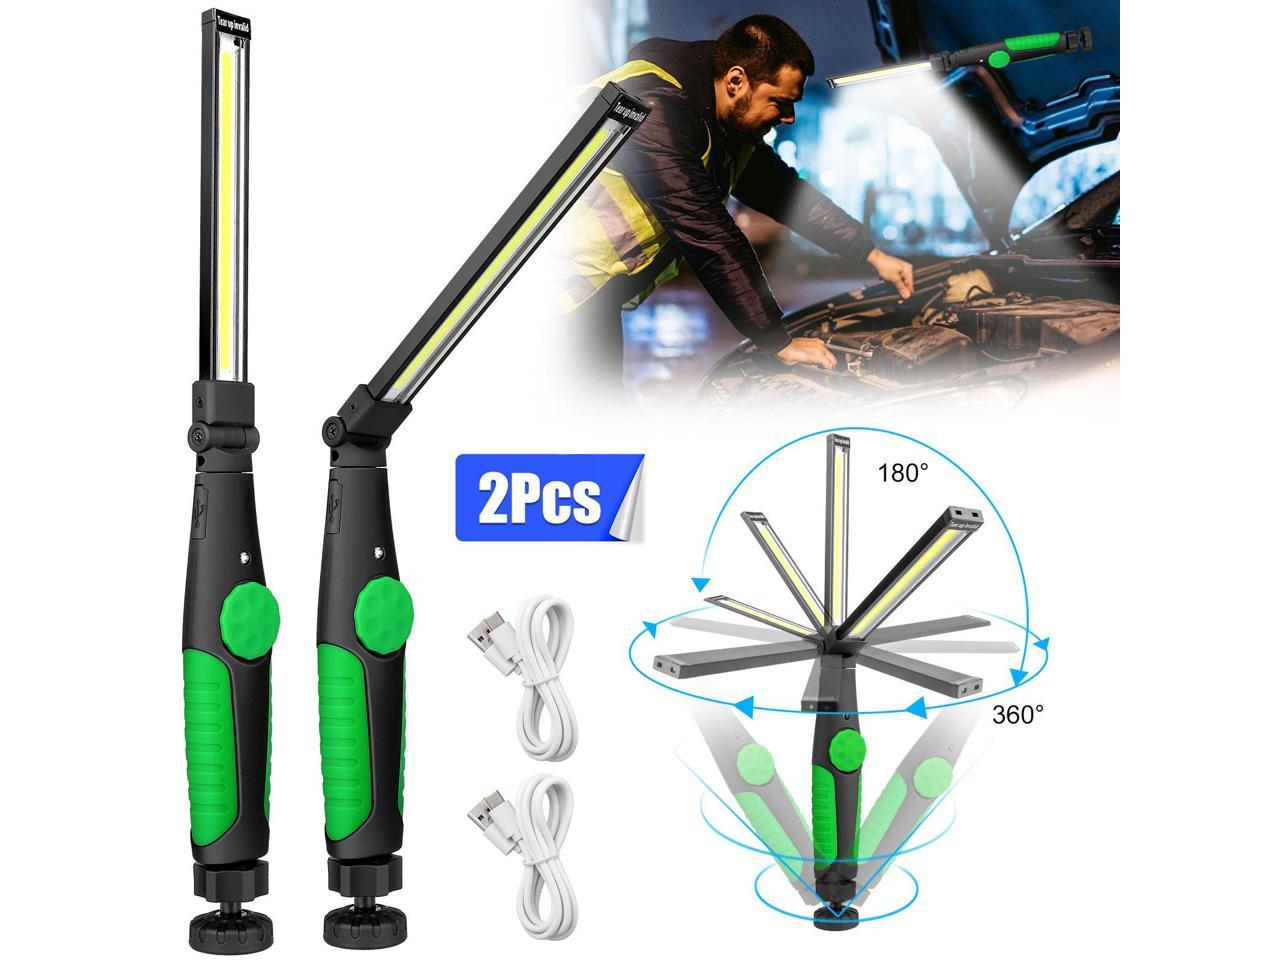 10000LM Rechargeable COB LED Slim Work Light Lamp Torch Flashlight USB Cable 